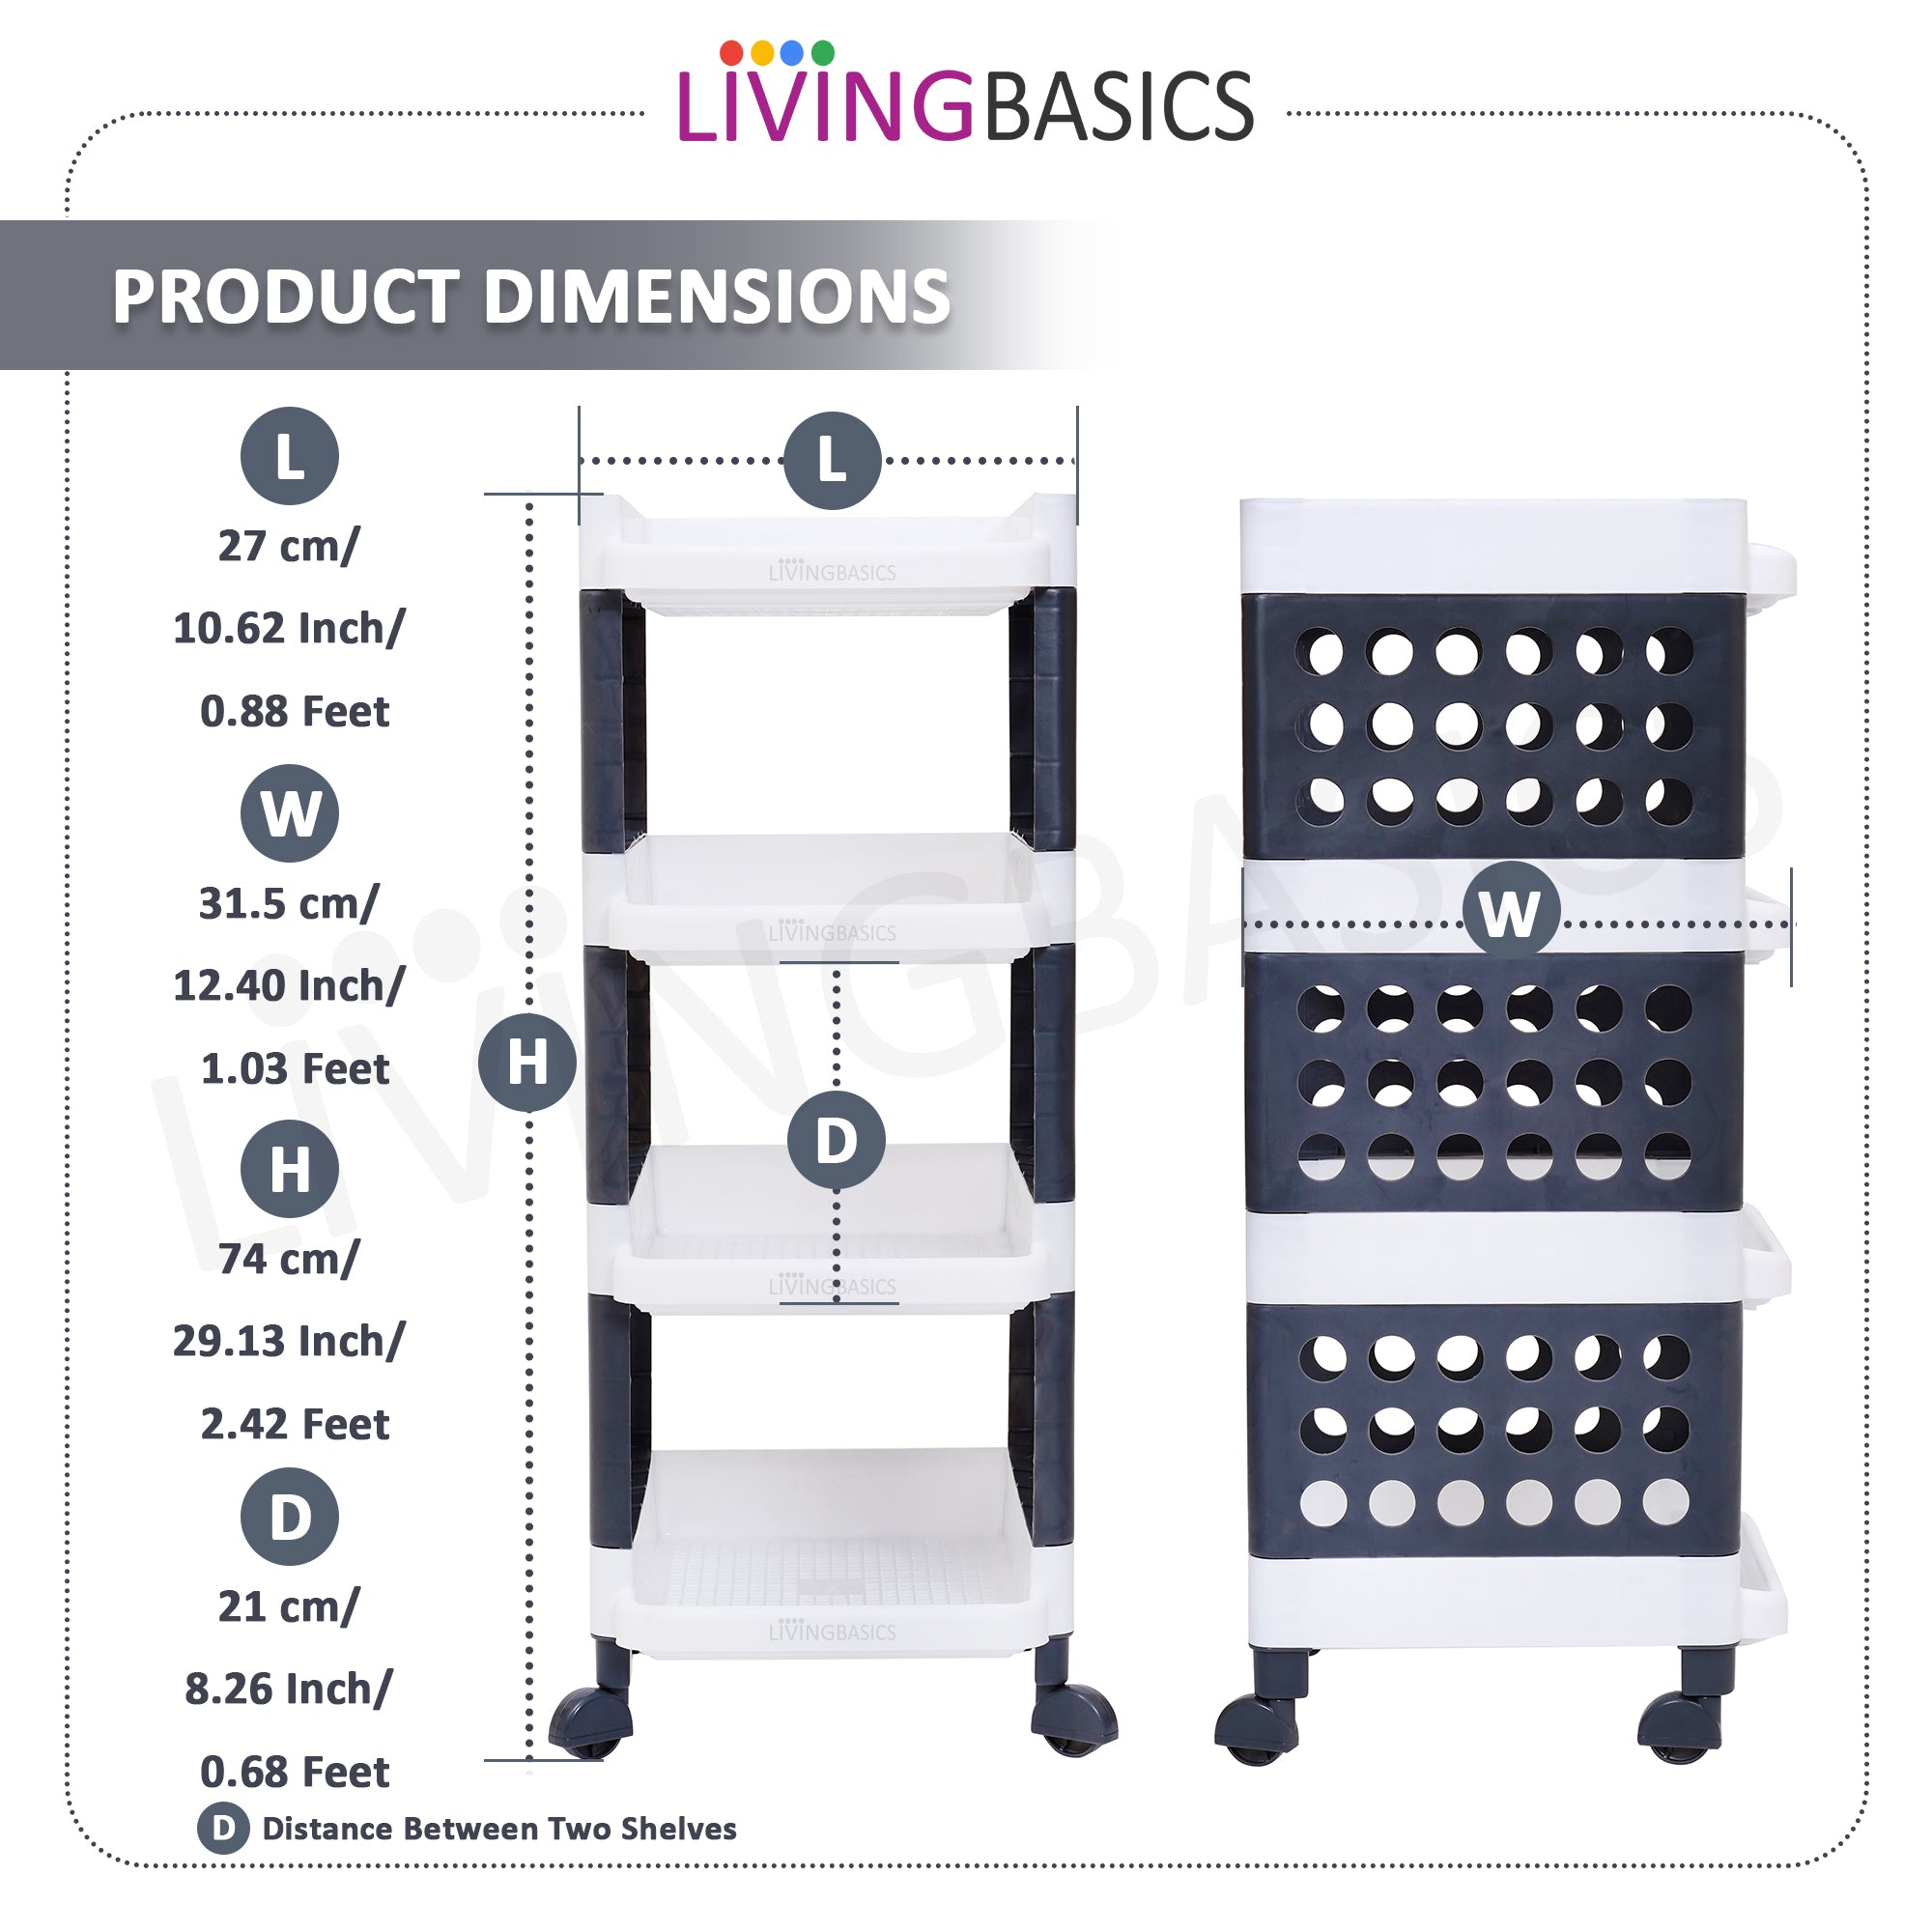 LivingBasics 4 Layer/Tier Multipurpose Plastic Storage Rack/Stand Organizer with Wheels, Space-Saving Utility Trolley for Narrow Places/Kitchen Cart/Vegetable Rack/Corner Shelf/Bedroom/Bathroom/Living Room/Office/Kids Toys (White - Grey)